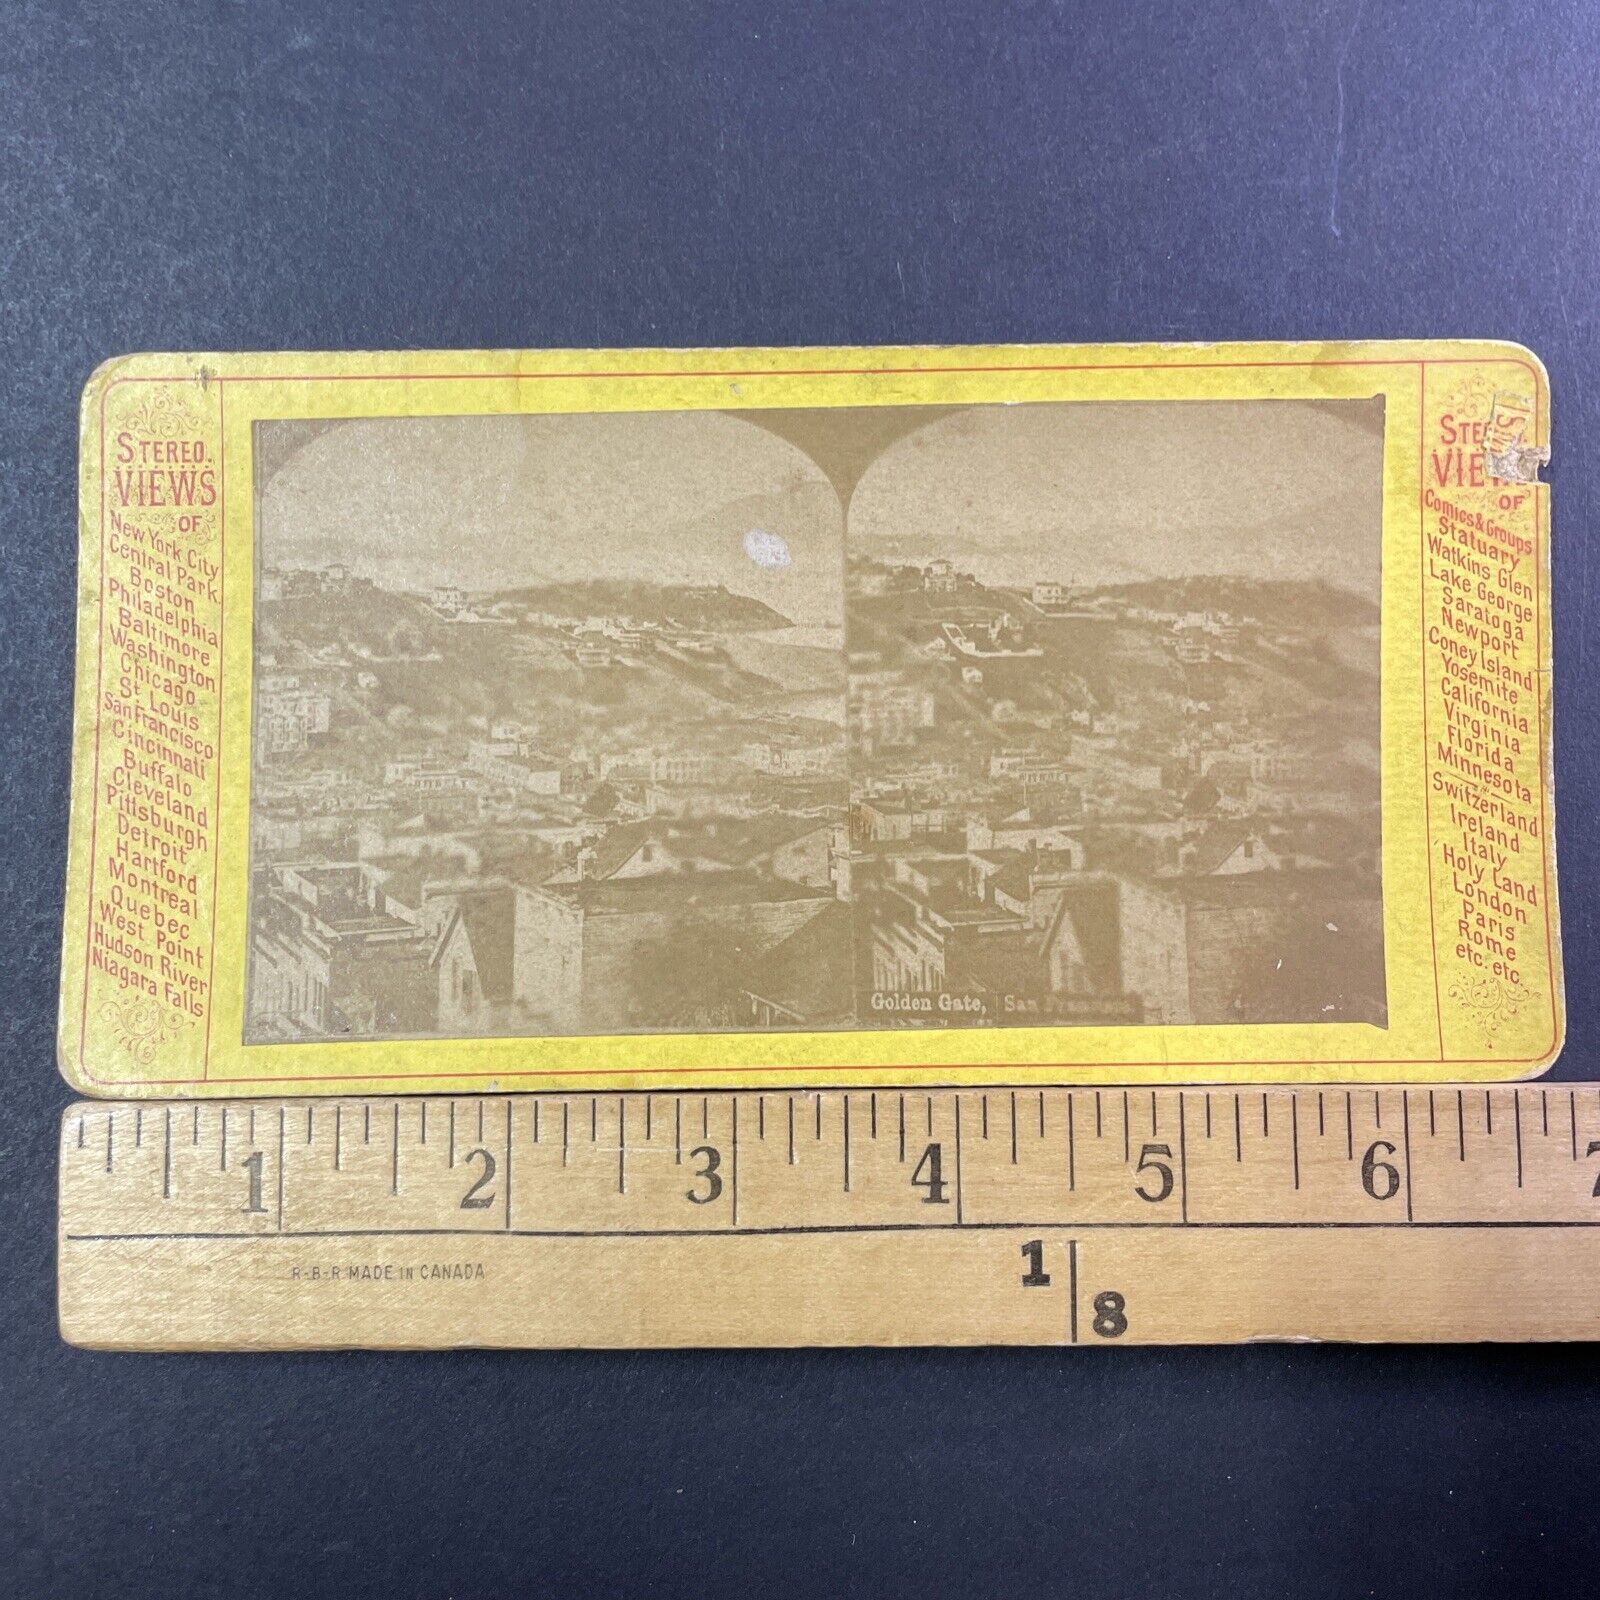 City Of San Francisco Downtown Stereoview Photo Card Antique c1875 X1288